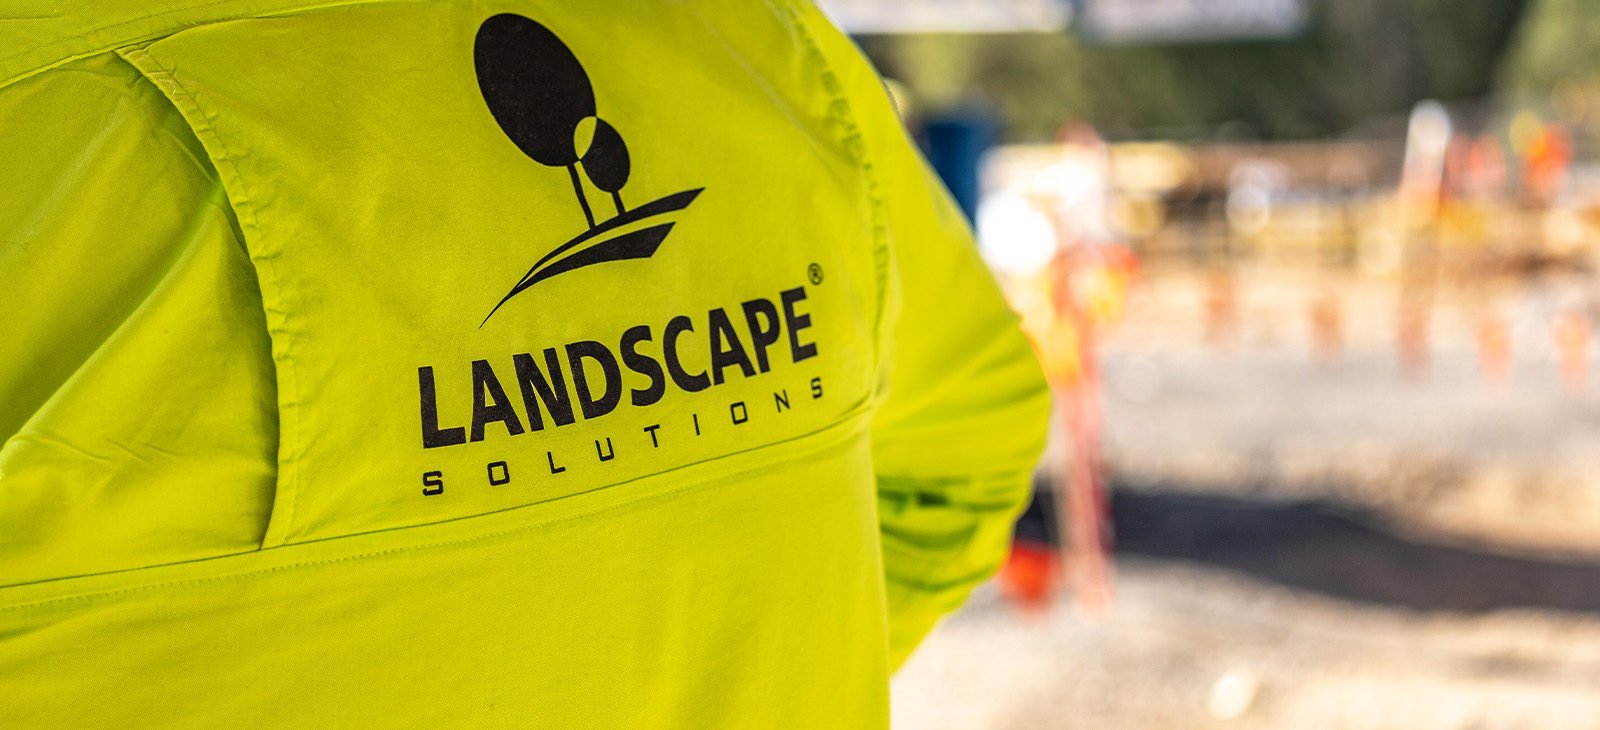 Apply now for a career with Landscape Solutions